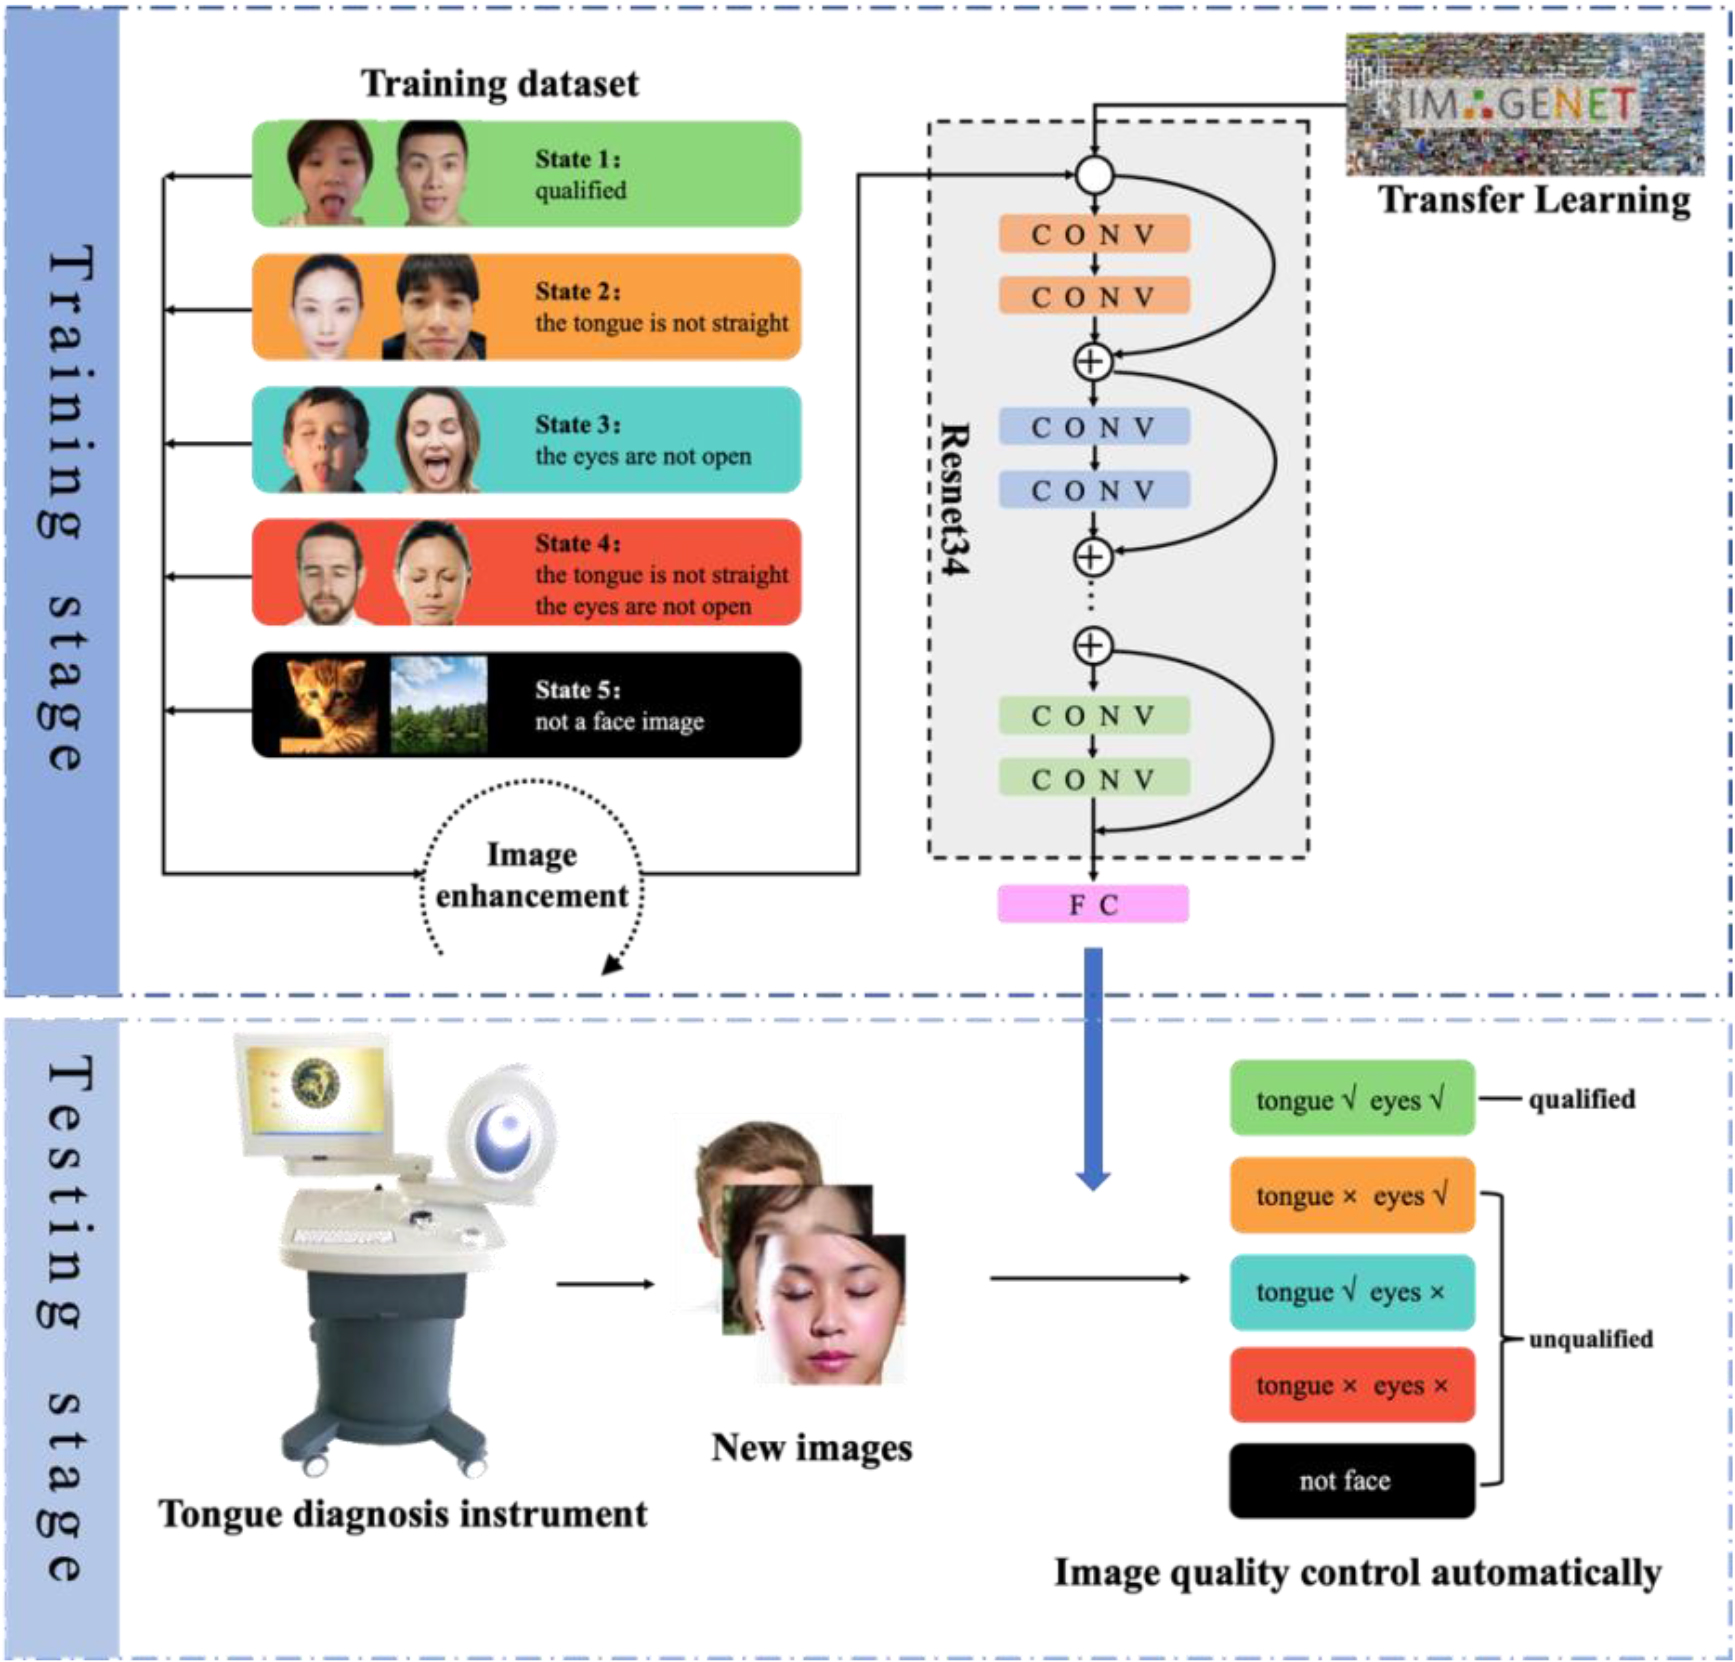 The workflow of our method. The workflow comprises two stages: the training stage depicted above utilizes a Resnet34-based transfer learning model with training data including five types of images; the testing stage uses the well trained model to identify new images and indicates the reasons for unqualified images.